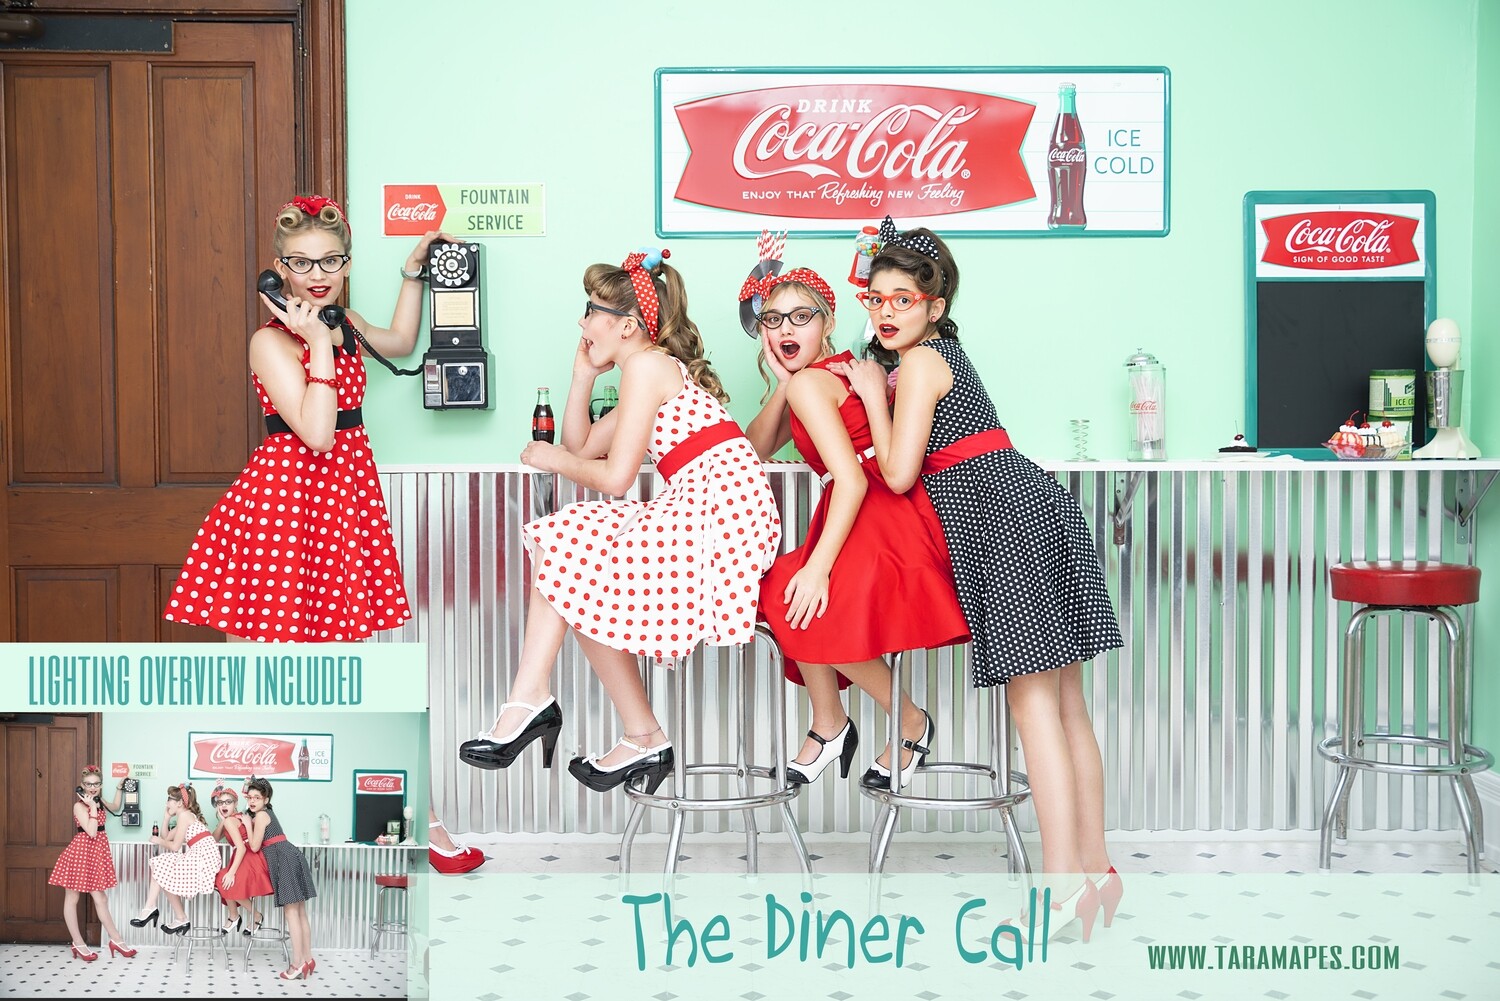 The Diner Painterly Tutorial - Fifties Theme - Photoshop Workflow Action Set Included- Fine Art Tutorial by Tara Mapes